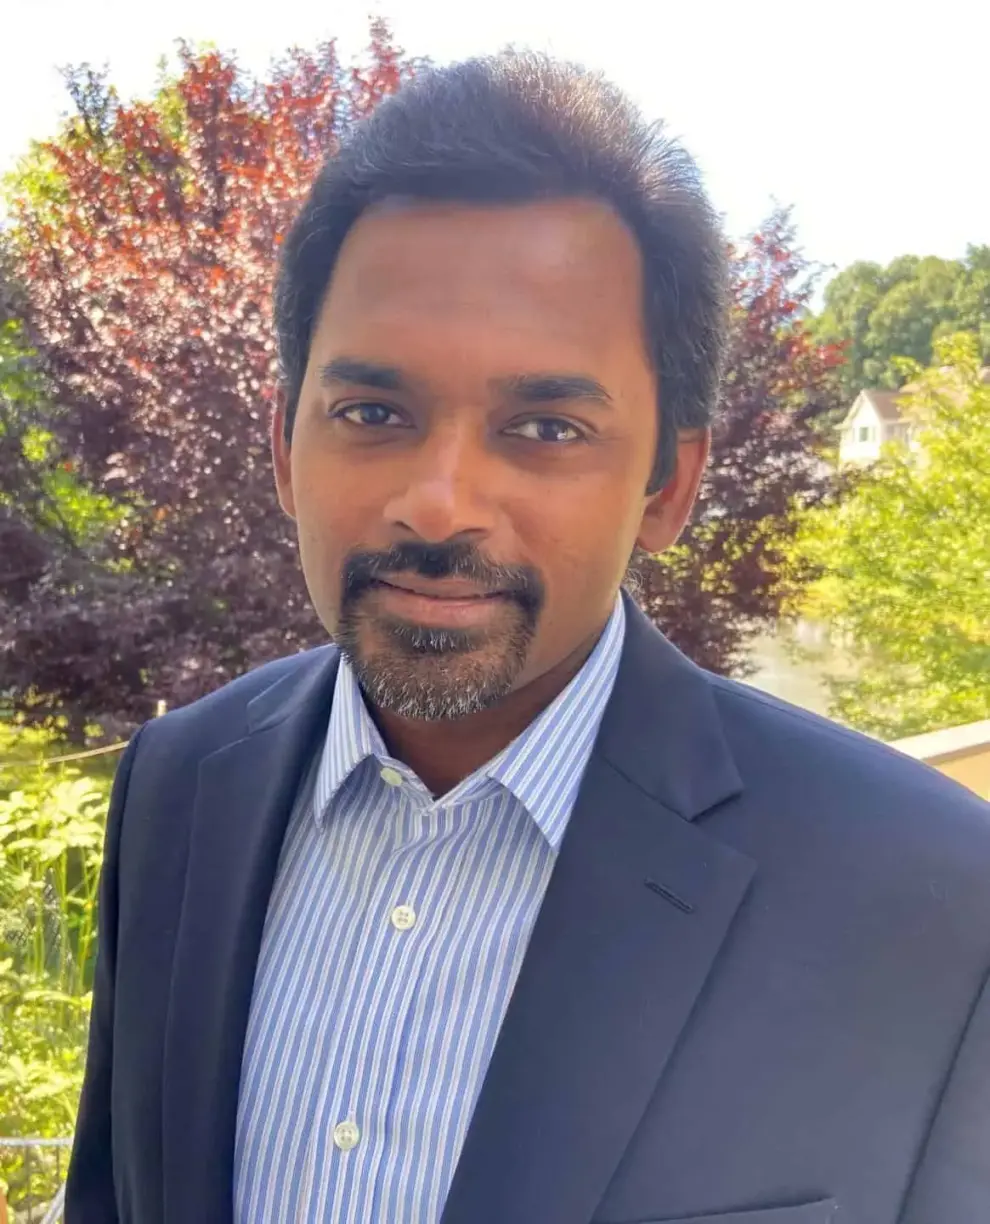 FREESE AND NICHOLS ADDS SABU PAUL TO LEAD FEMA SUPPORT PROJECTS  FOR EAST COAST, GREAT LAKES REGIONS